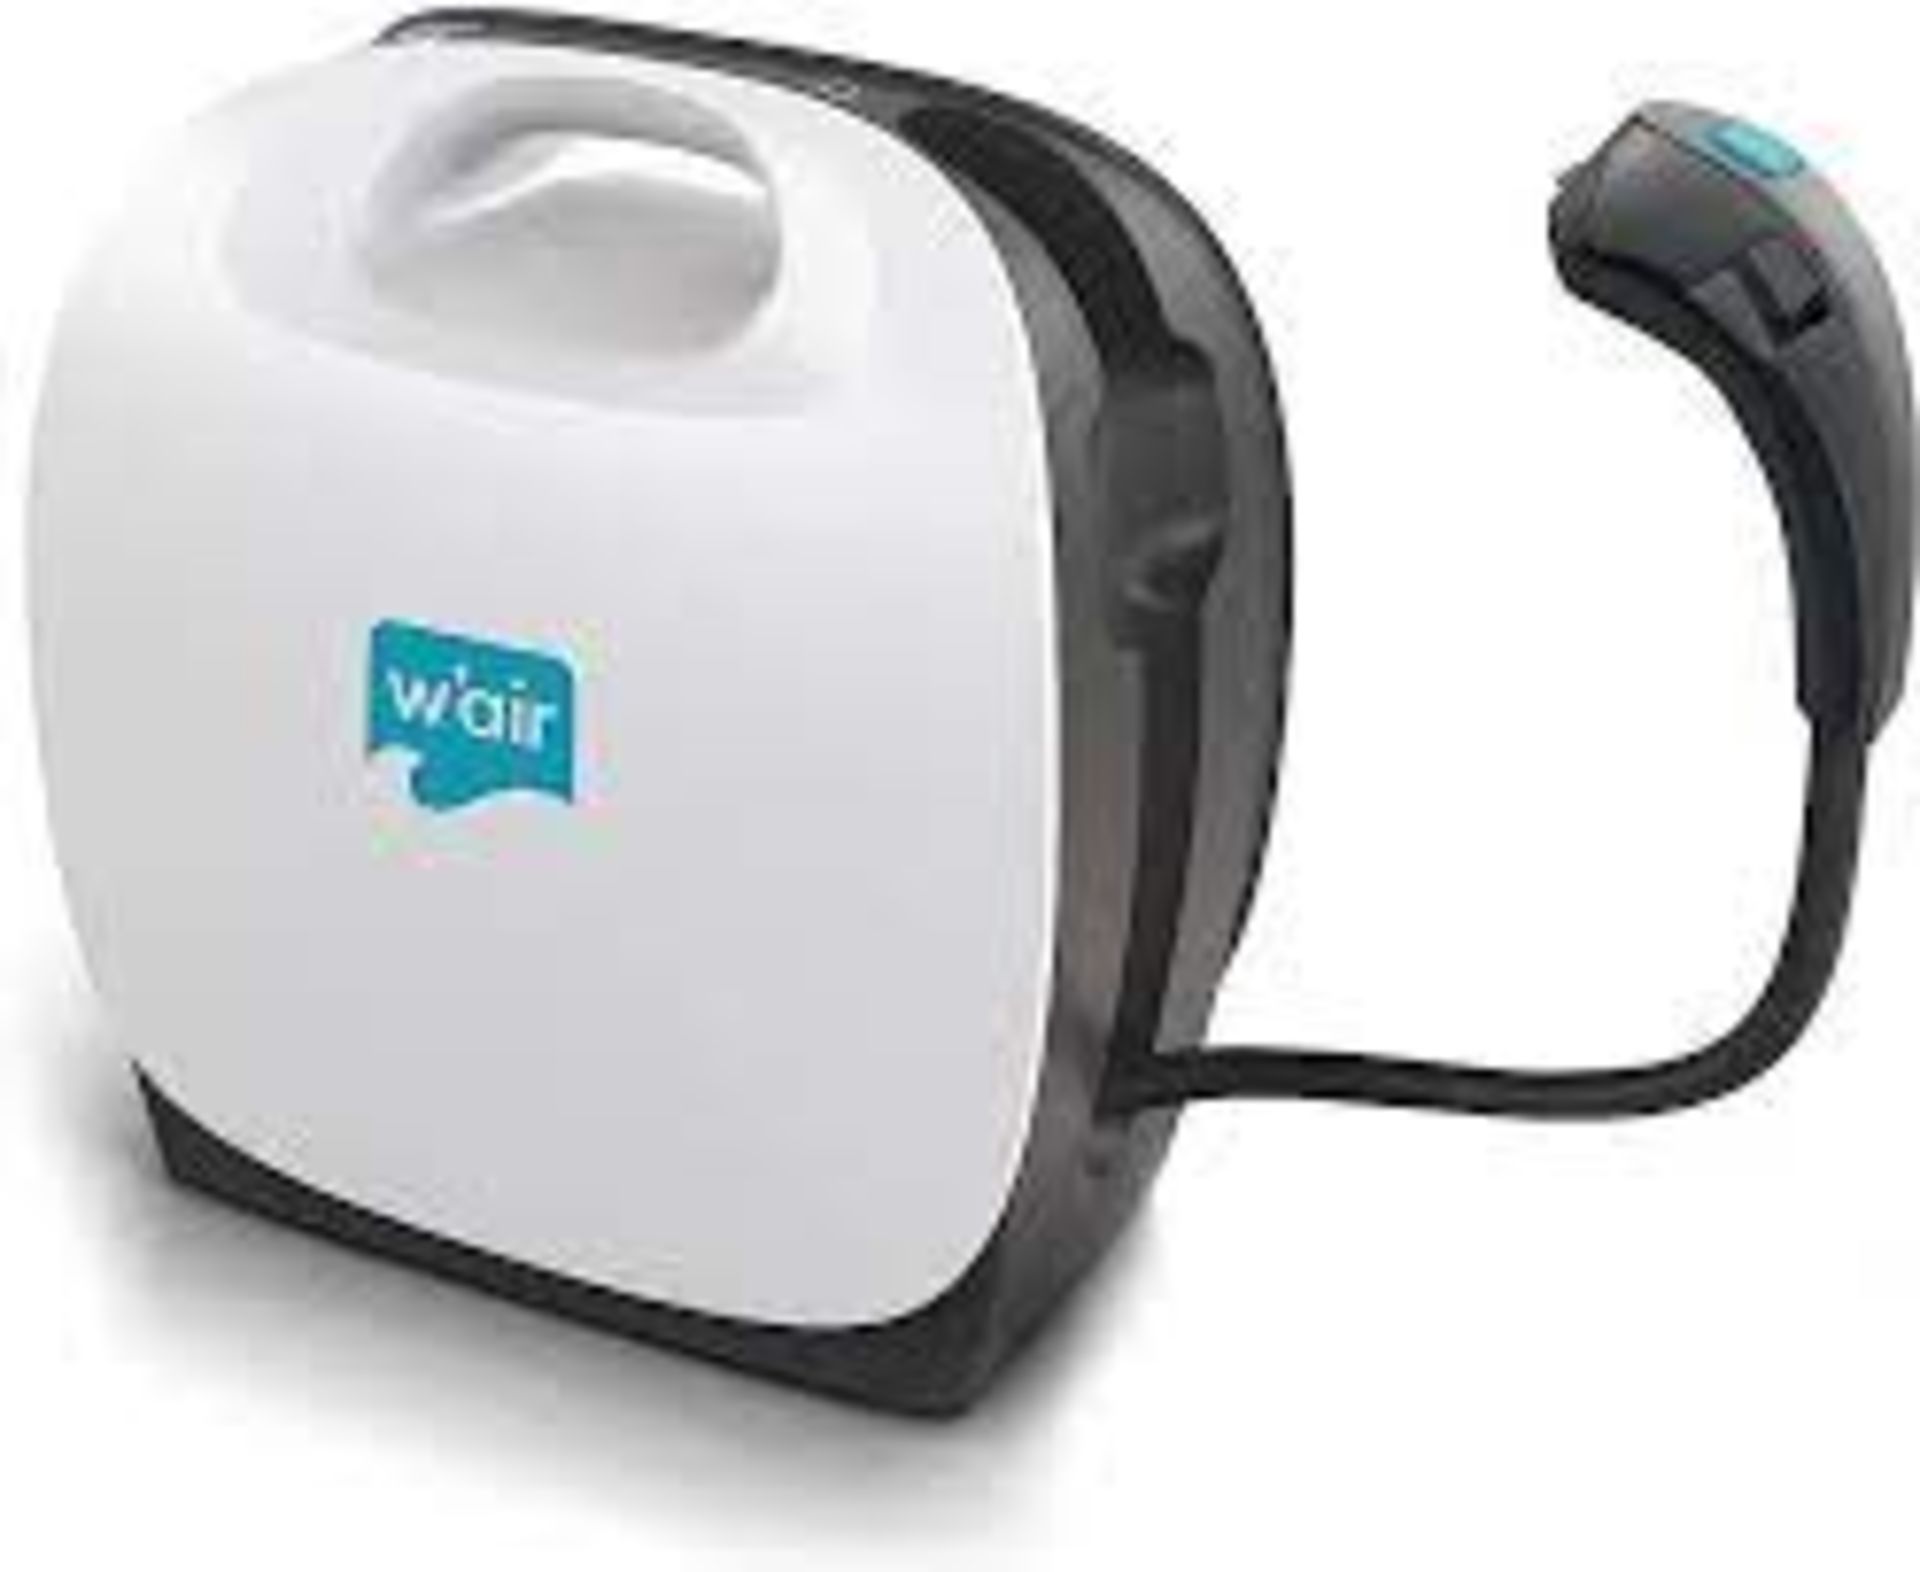 20 X BRAND NEW W'AIR SNEAKER CLEANING SYSTEMS RRP £299, The w'air uses hydrodynamic technology - Bild 6 aus 6